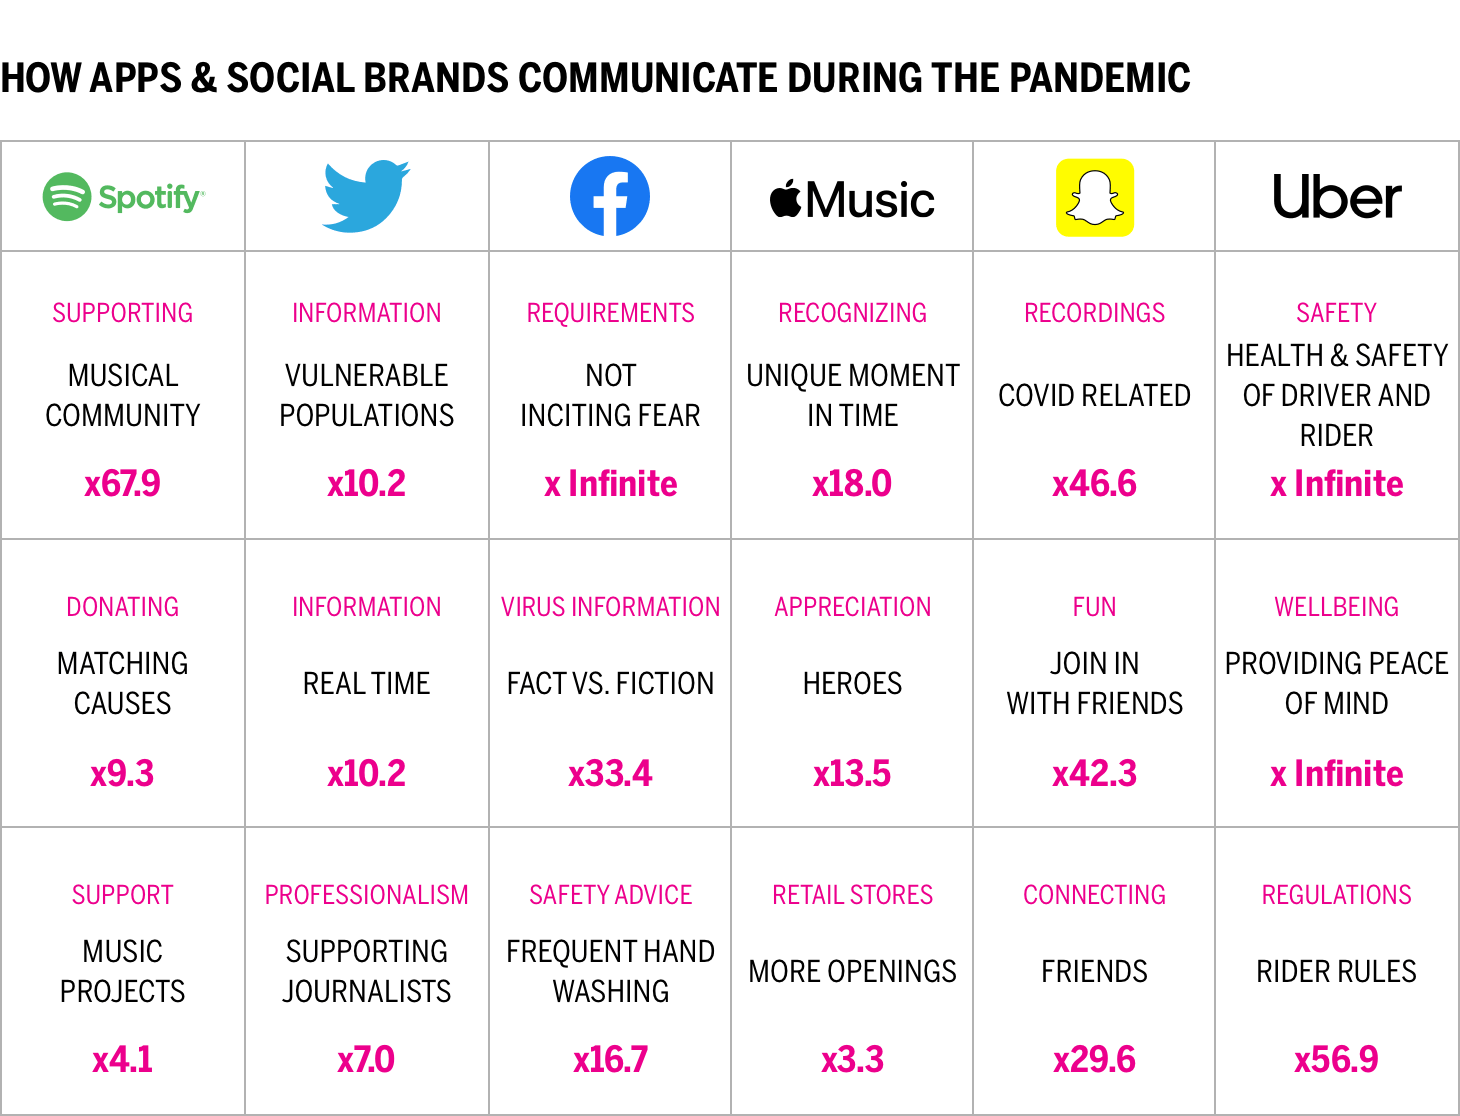 HOW APPS & SOCIAL BRANDS COMMUNICATE DURING THE PANDEMIC chart